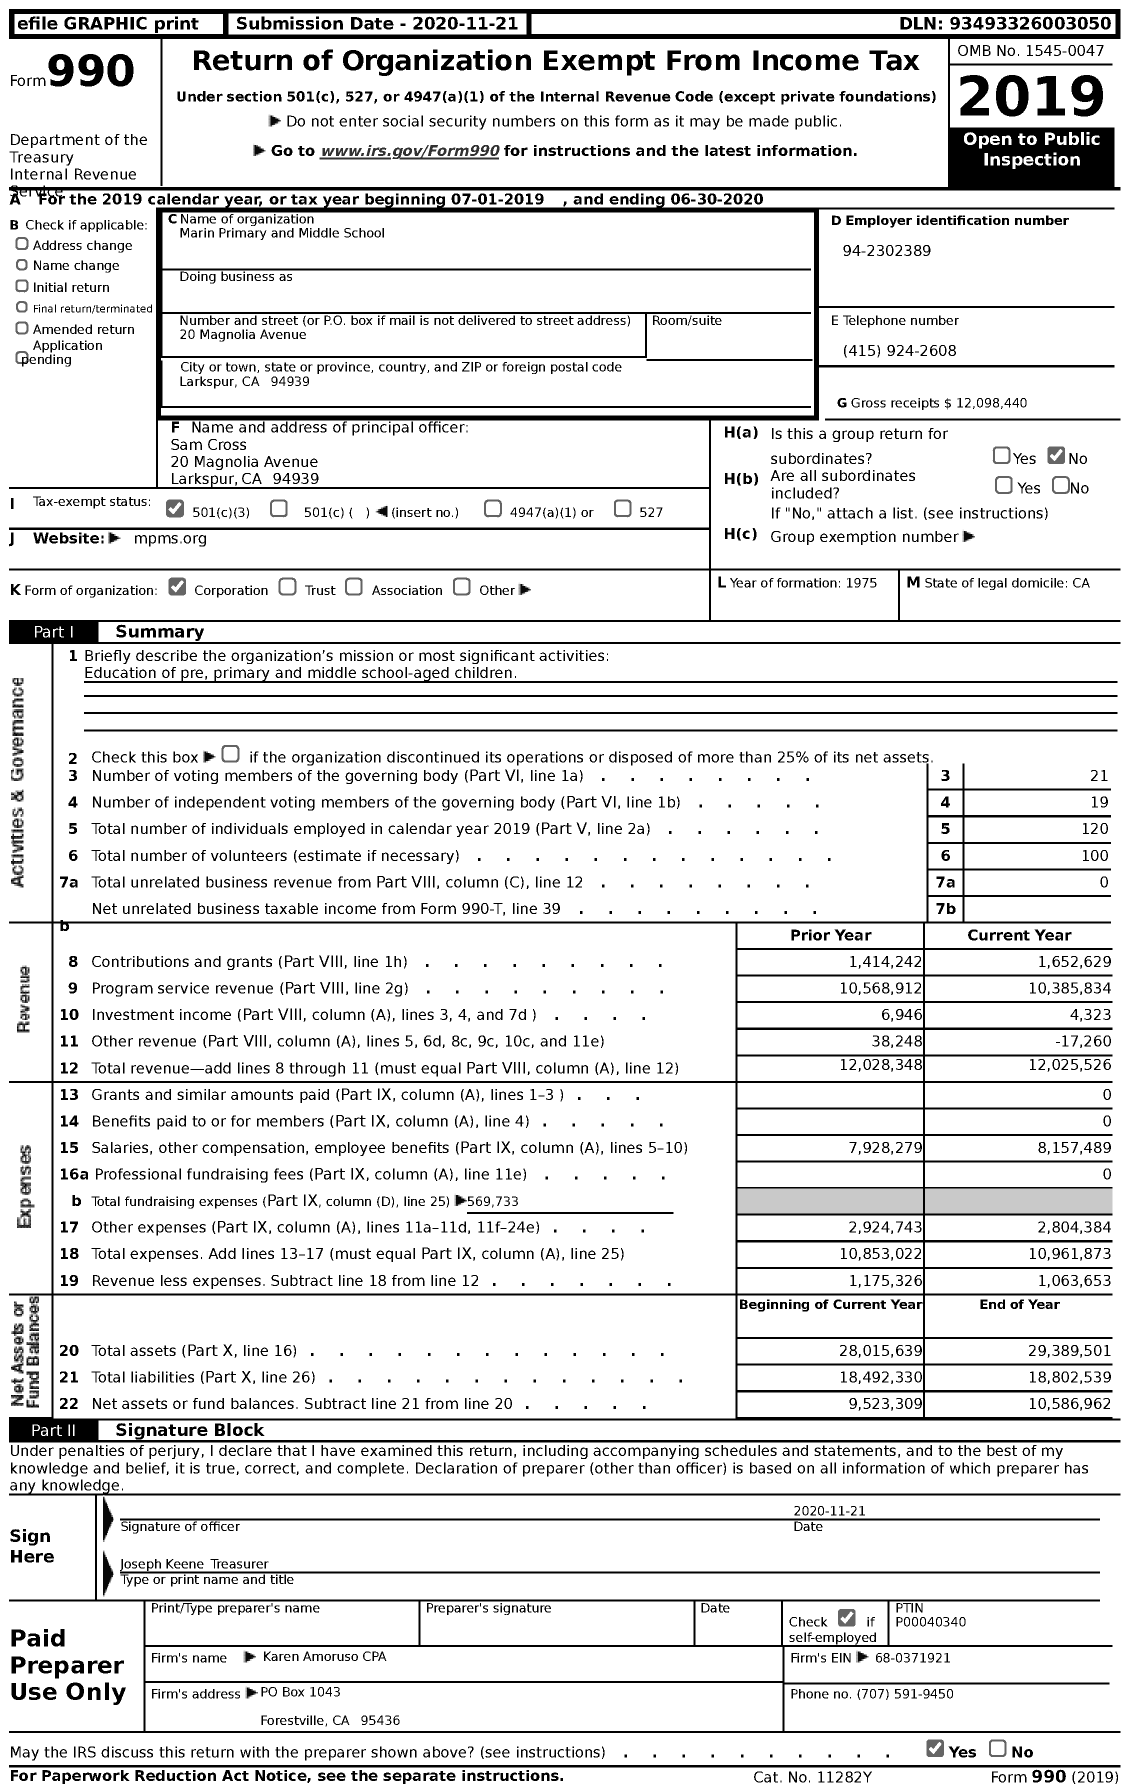 Image of first page of 2019 Form 990 for Marin Primary & Middle School (MP&MS)